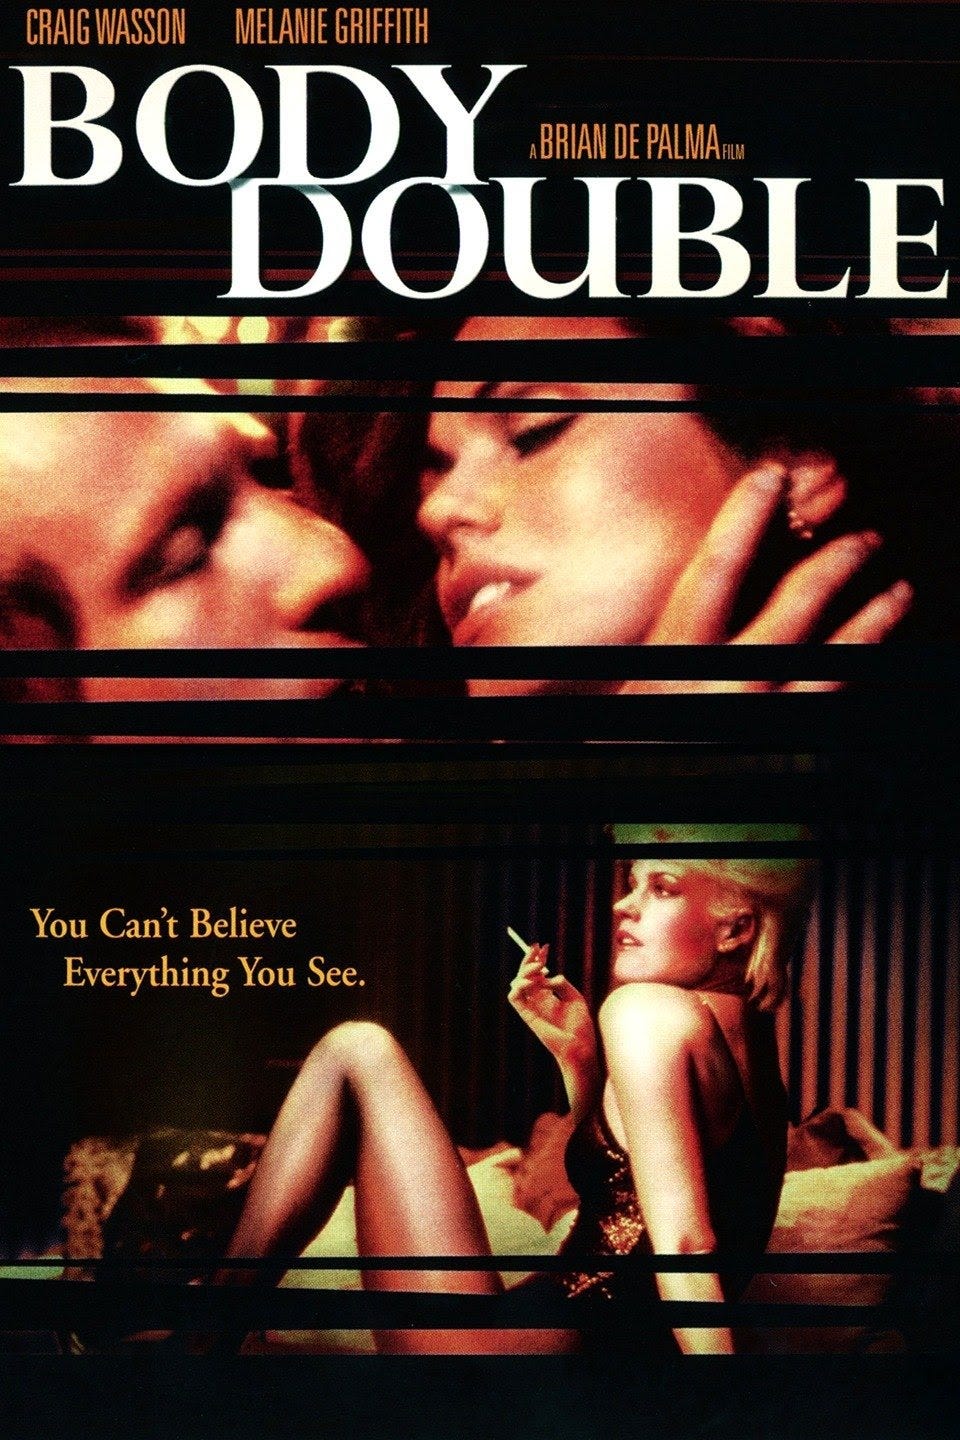 An image of a poster for the film "Body Double". The text reads: Craig Wasson Melanie Griffith "Body Double - You Can't Believe Everything You See."